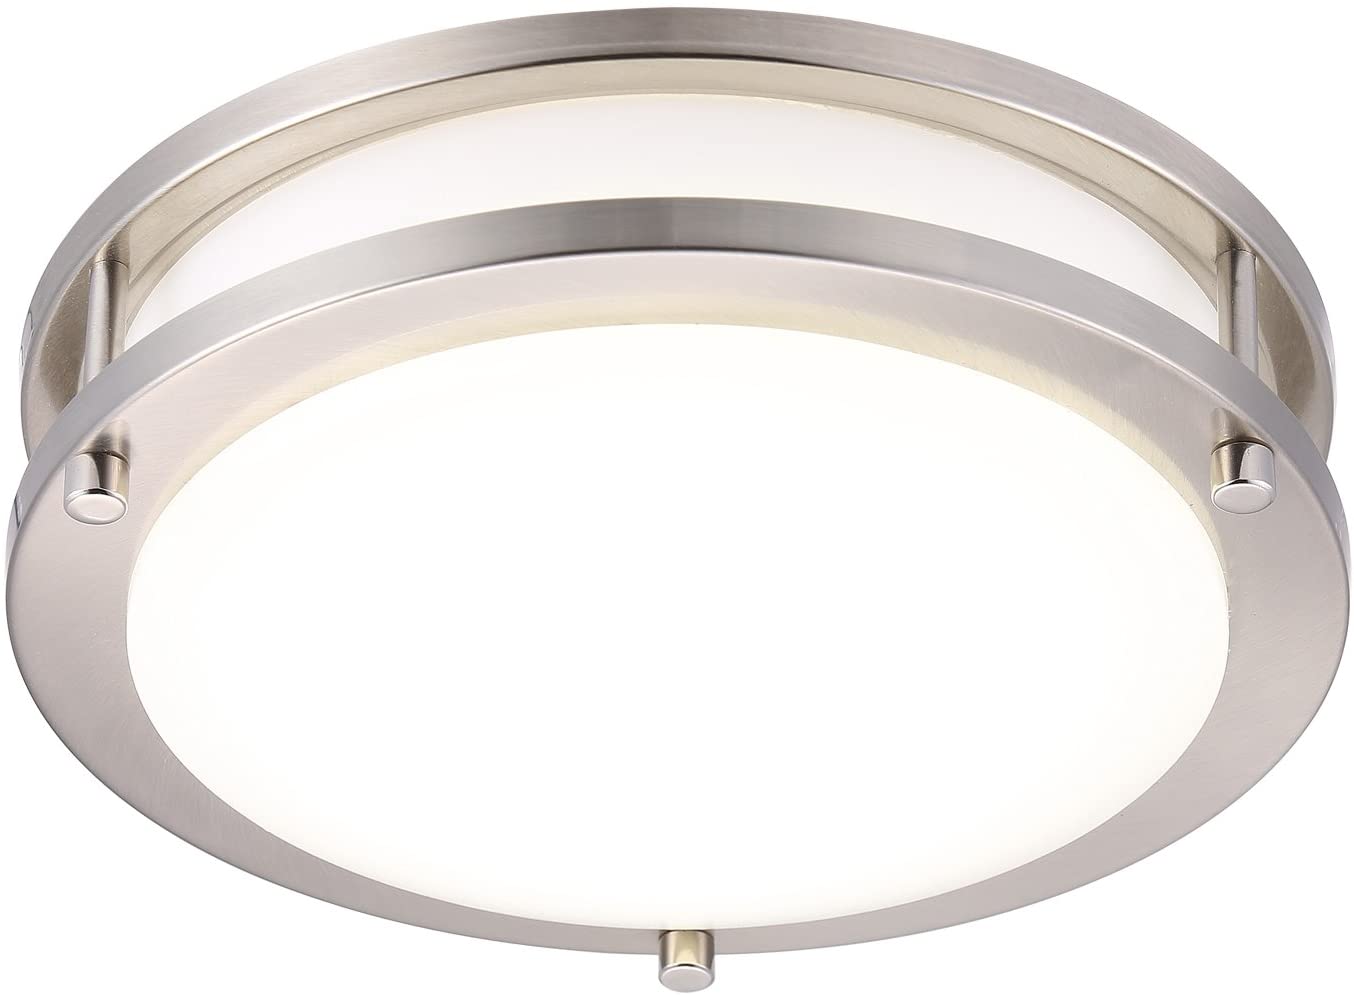 LED Flush Mount Ceiling Light, 10 inch, 17W(120W Equivalent) Dimmable 1050lm, 4000K Cool White,Brushed Nickel Round Lighting Fixture for Kitchen,Hallway,Bathroom,Stairwell, ETL/JA8